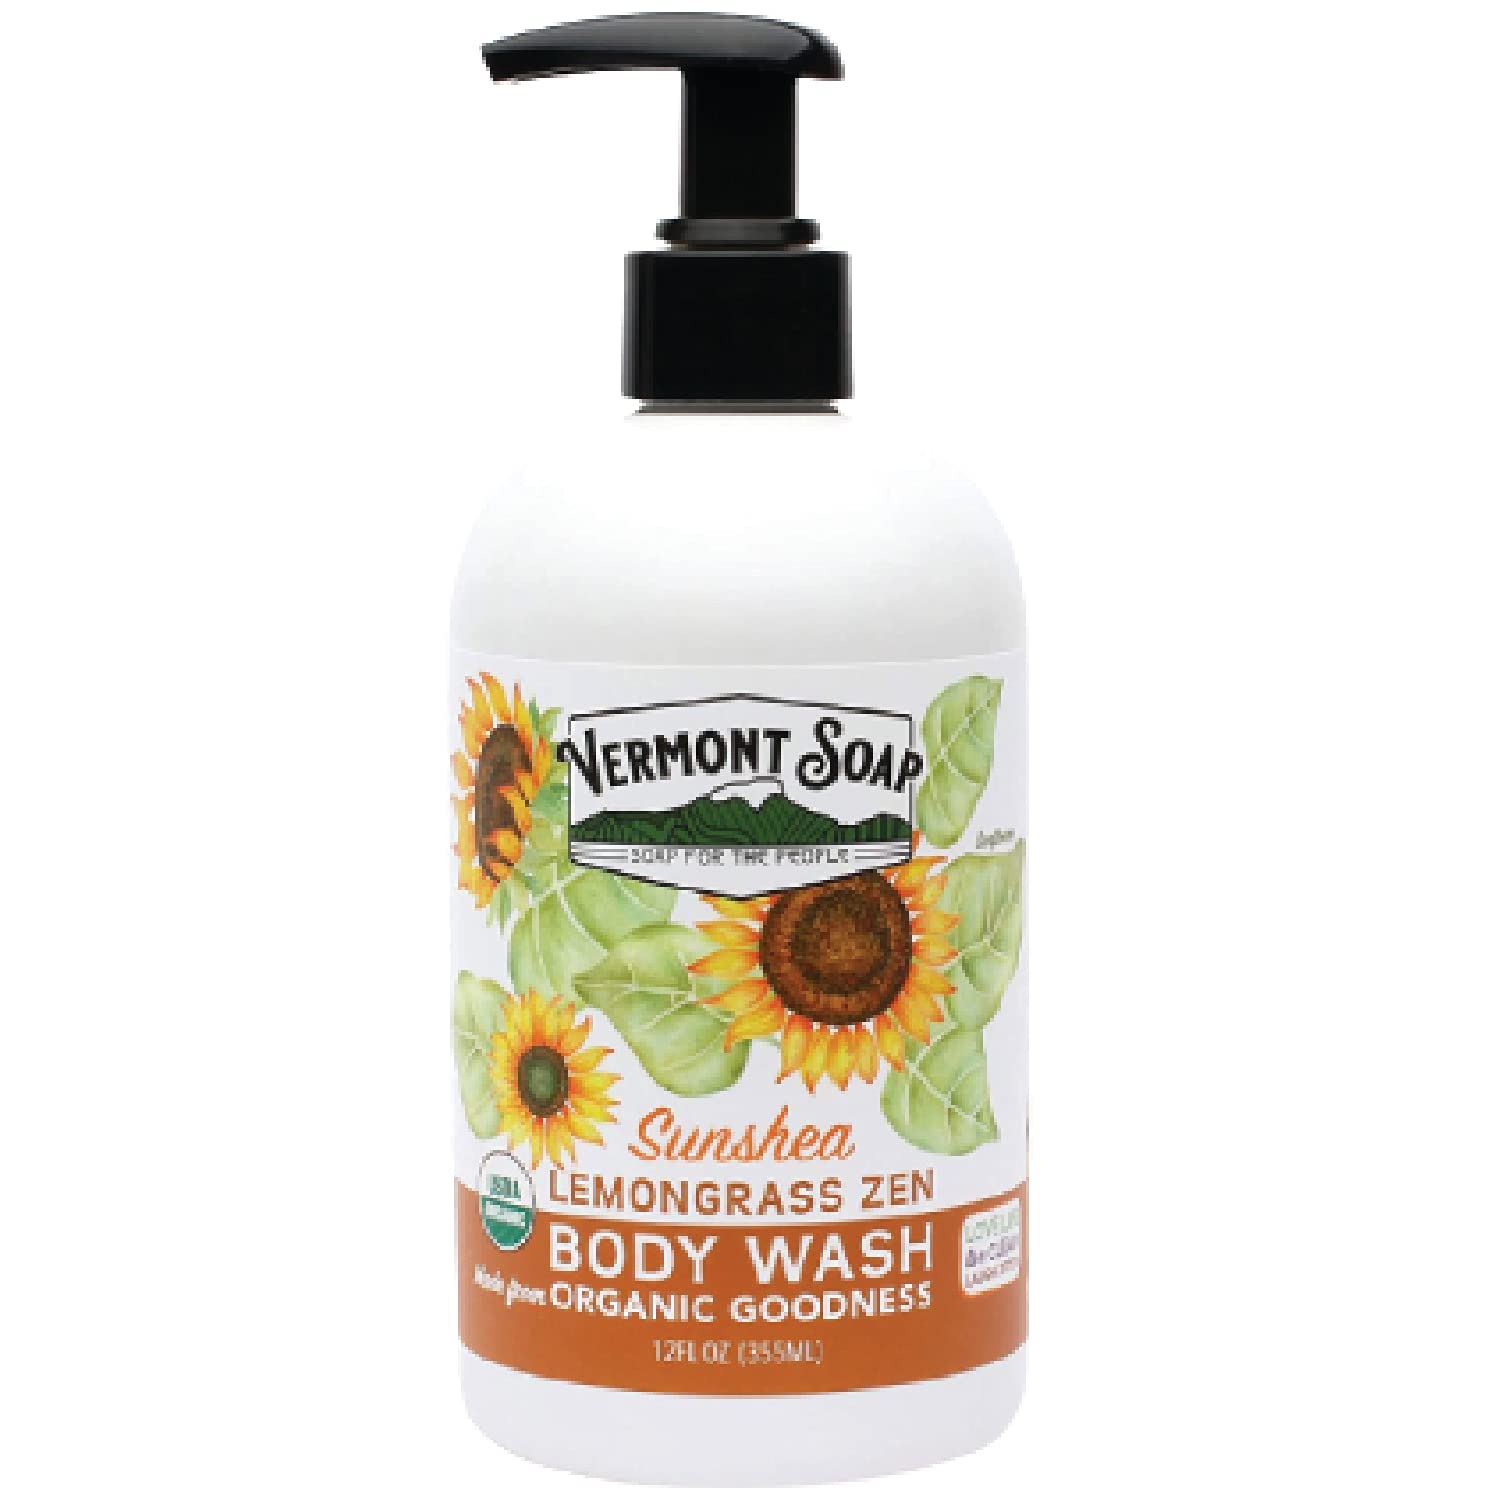 VERMONT SOAP Body Wash, Natural Body Wash with Shea Butter, Mild Gel Body Wash for Moisturizing and Soothing Skin, Fragrance Free Body Wash for Women & Men (Lemongrass Zen, 12oz)